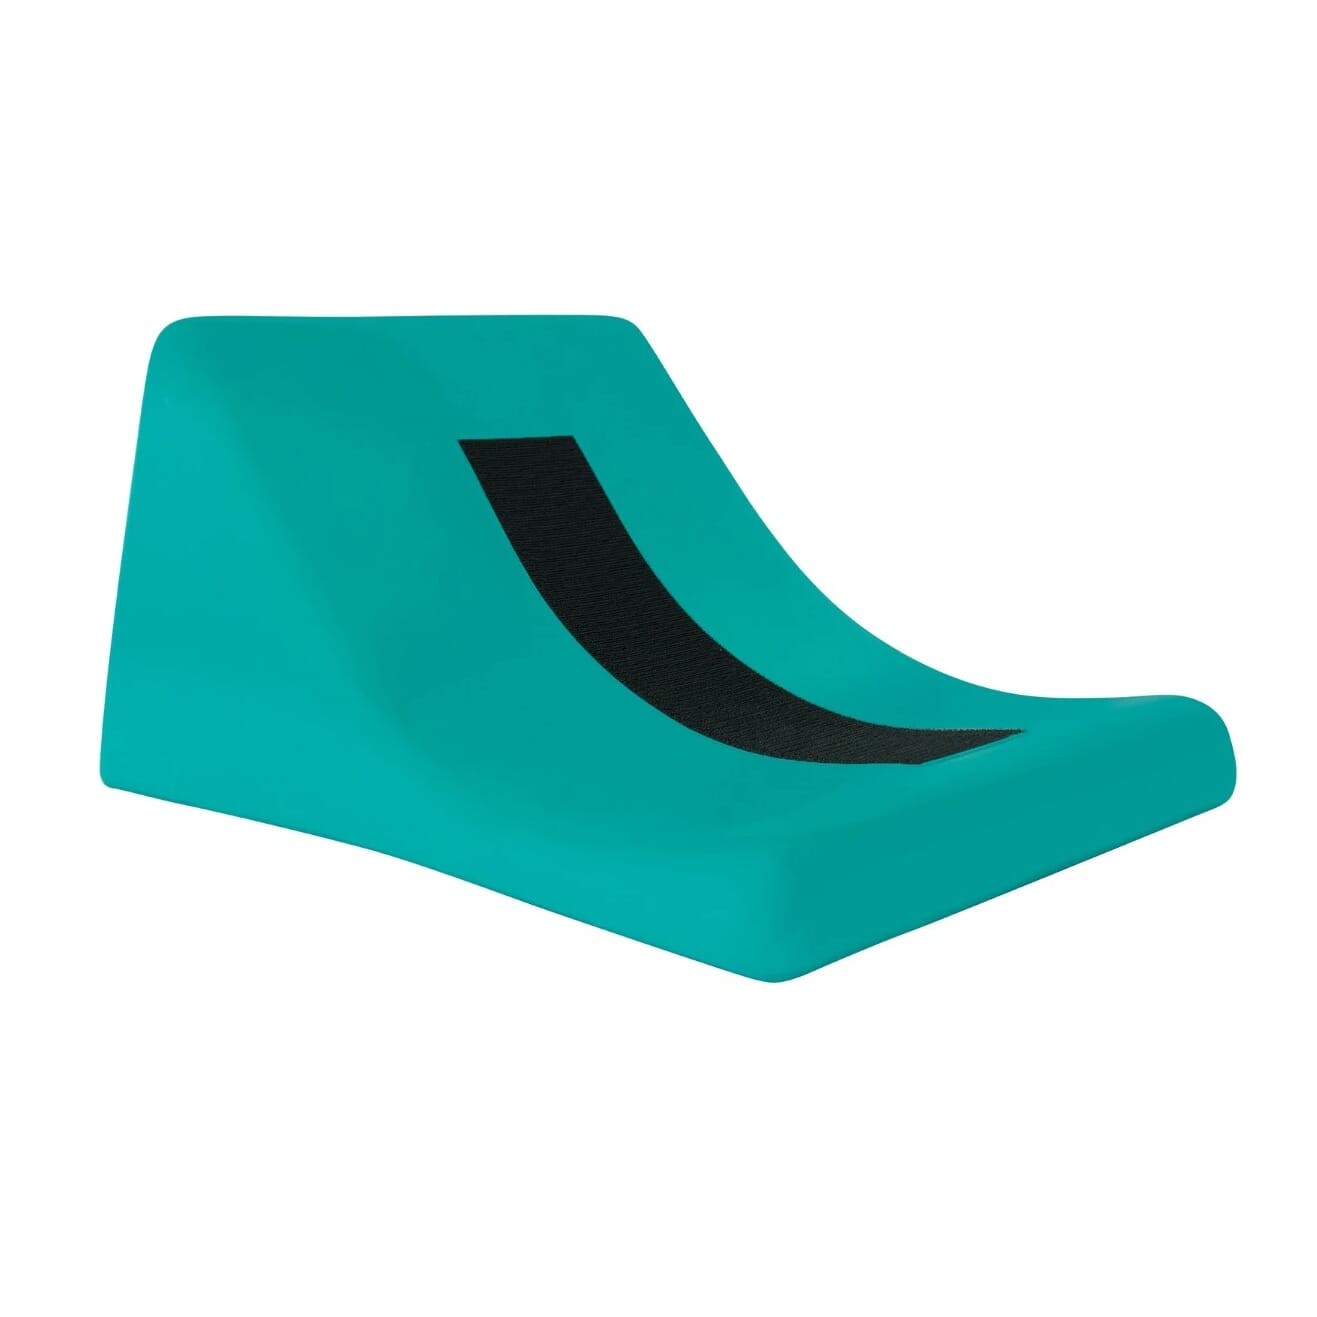 View Tumble Forms Floor Sitter Wedge Teal SML information